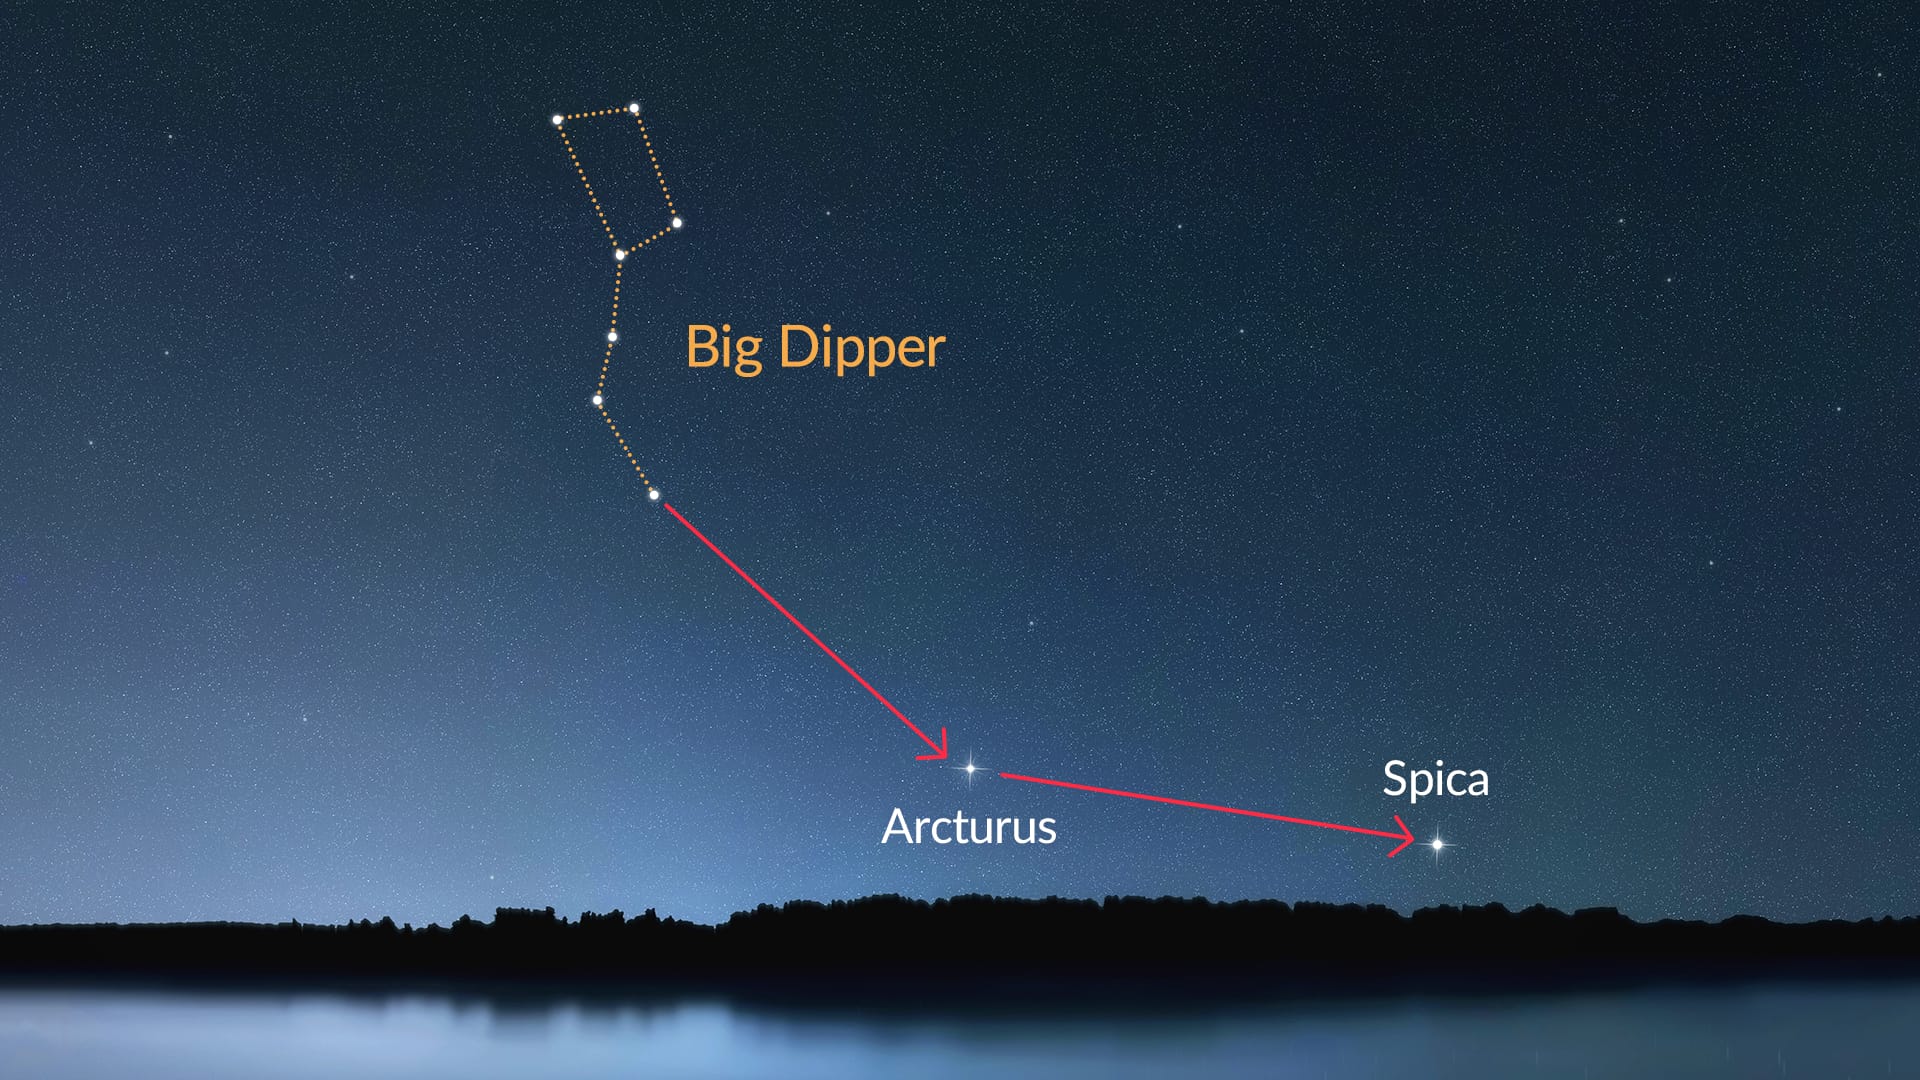 How to find Spica using the Big Dipper